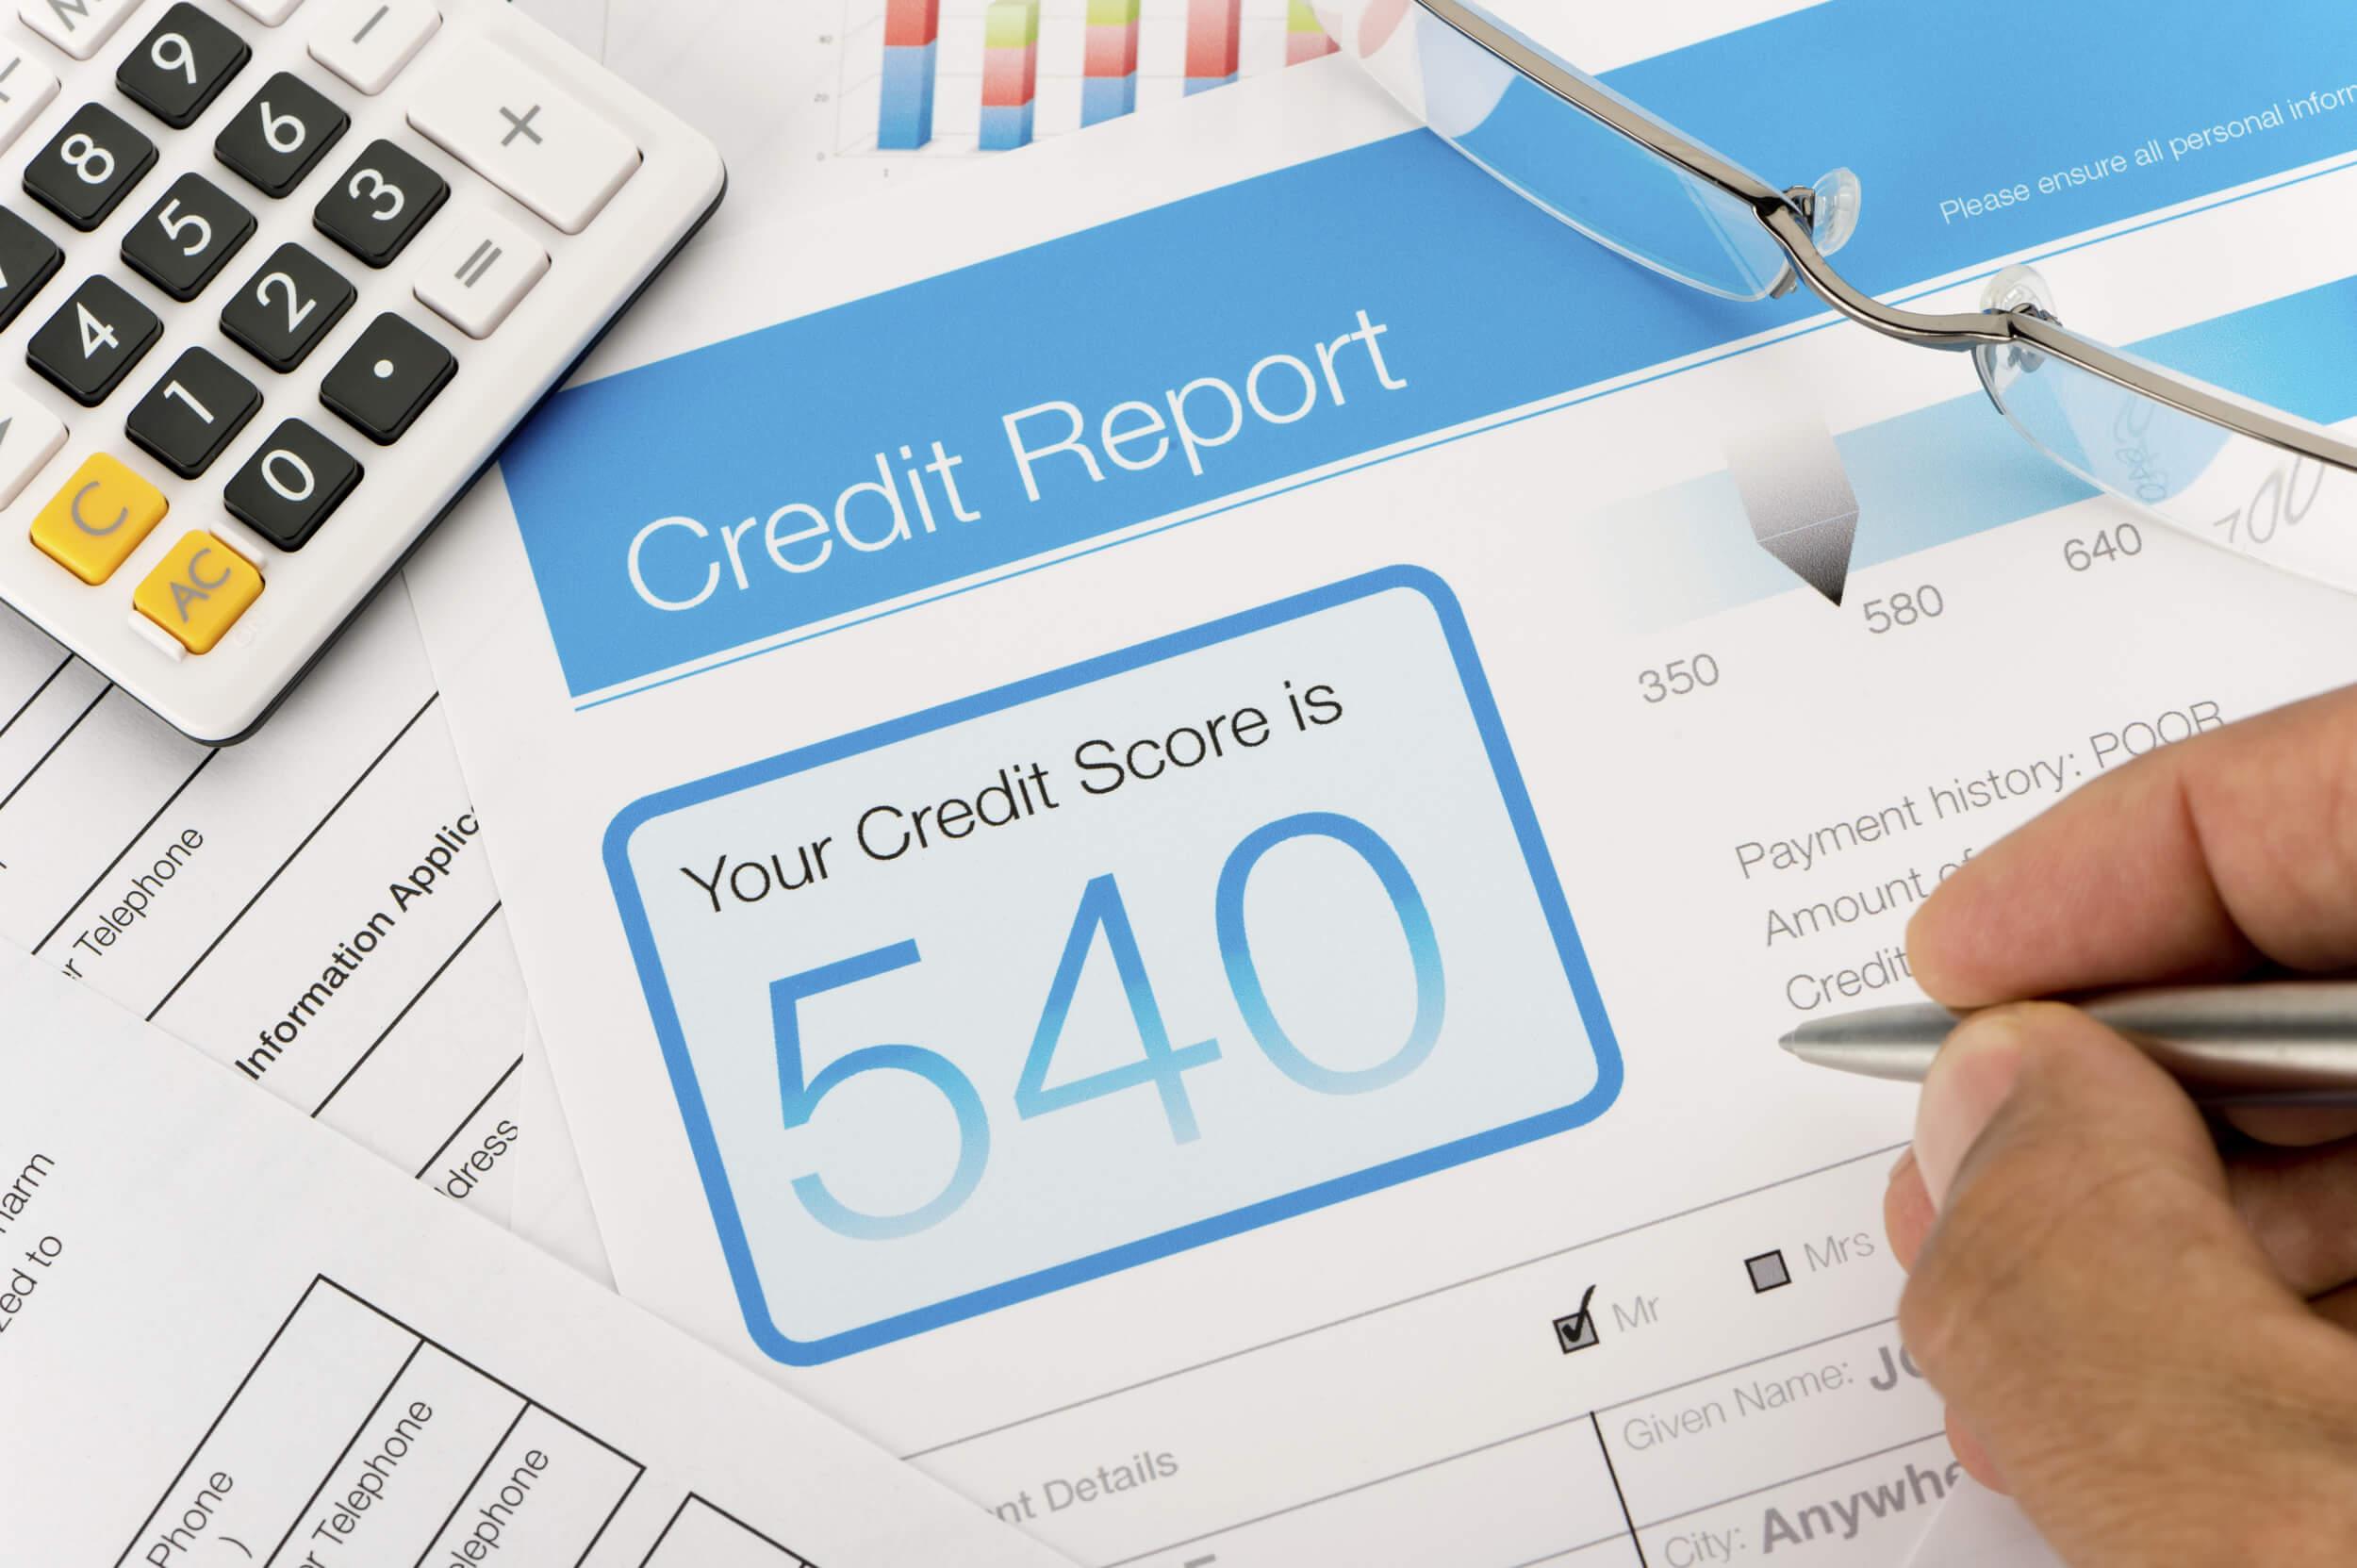 credit-report-with-score-1